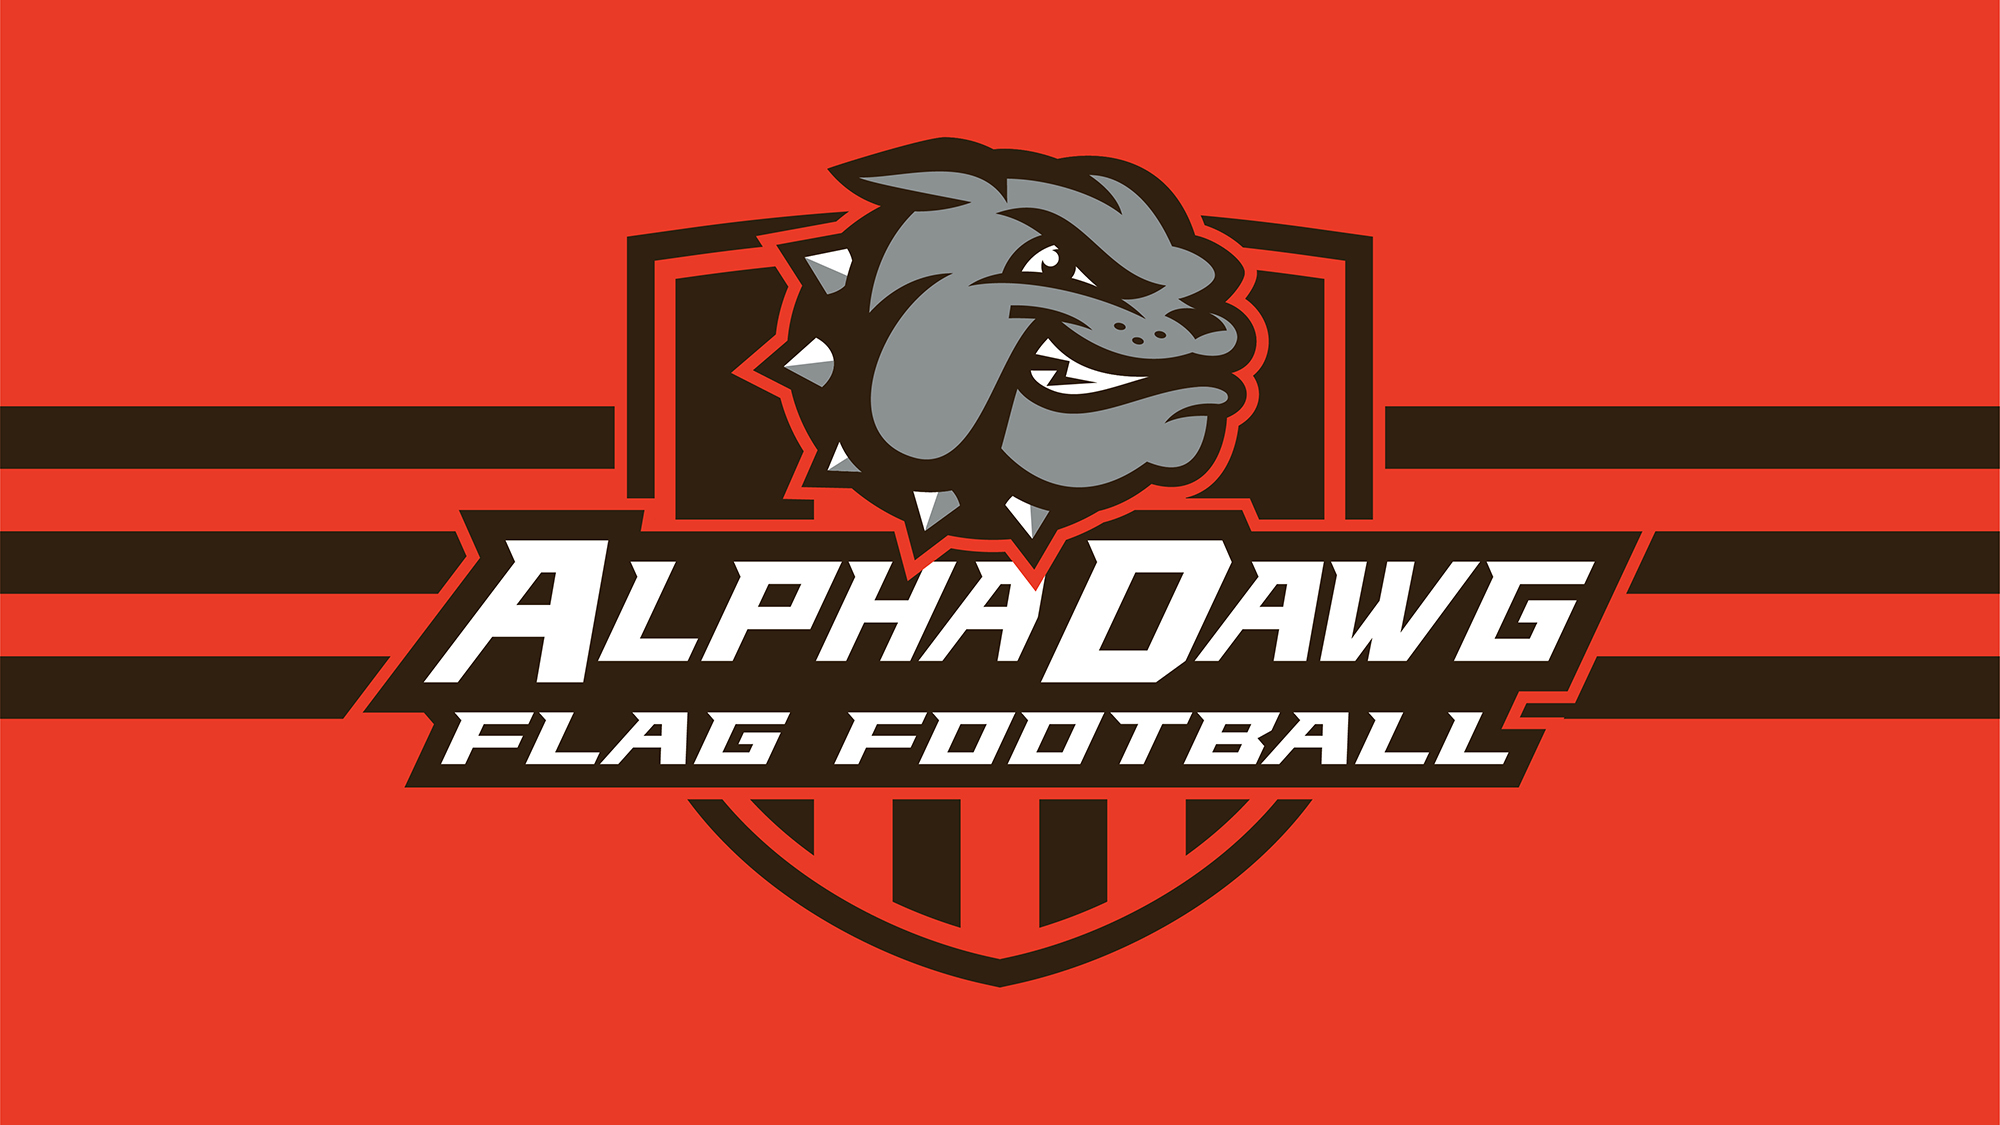 Alpha Dawg Banner Graphic